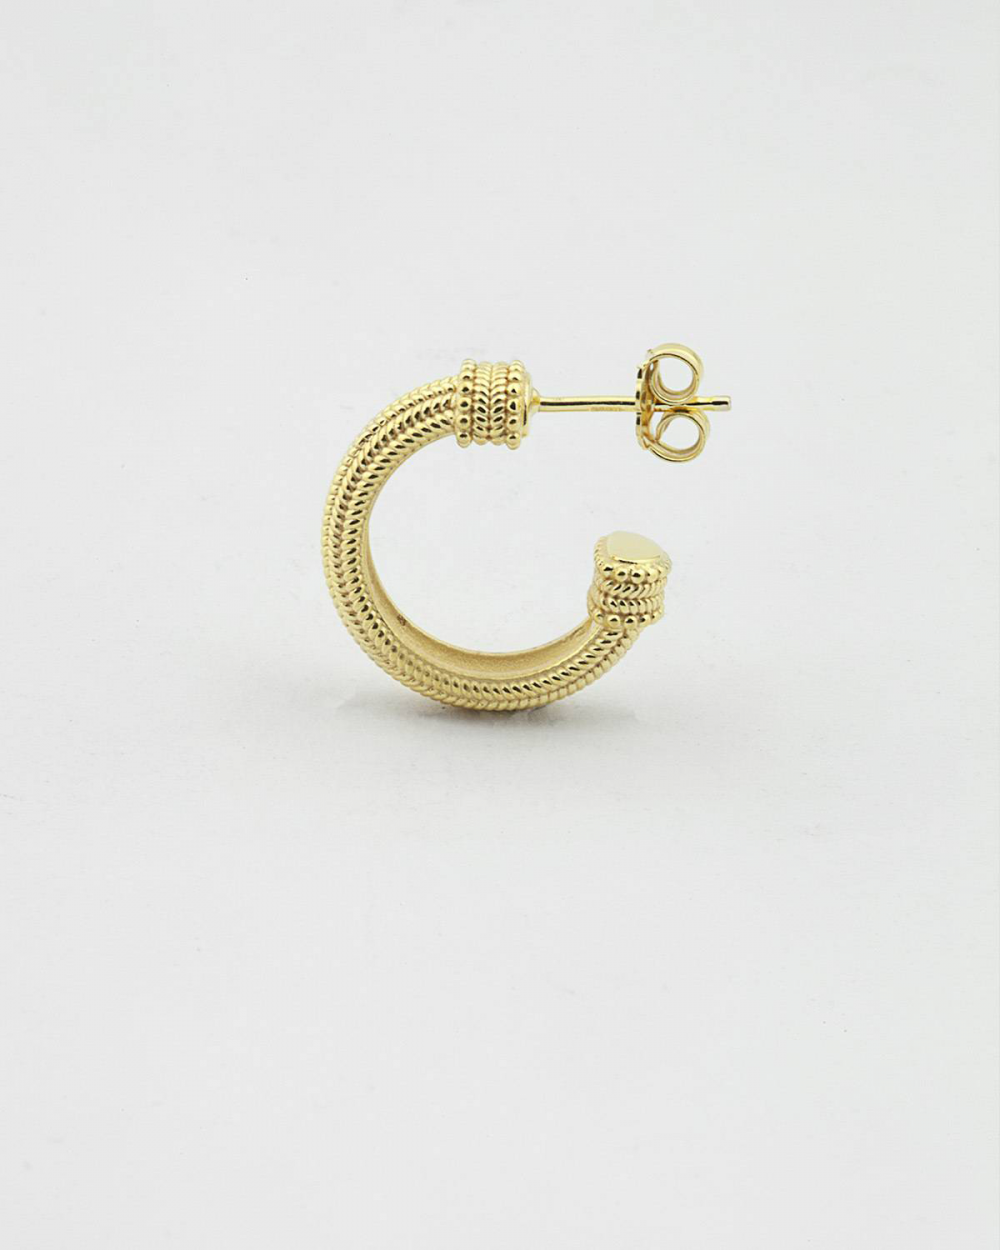 YELLOW GOLD MAGNA GRECIA ROUND CIRCLE HOOP SINGLE EARRING